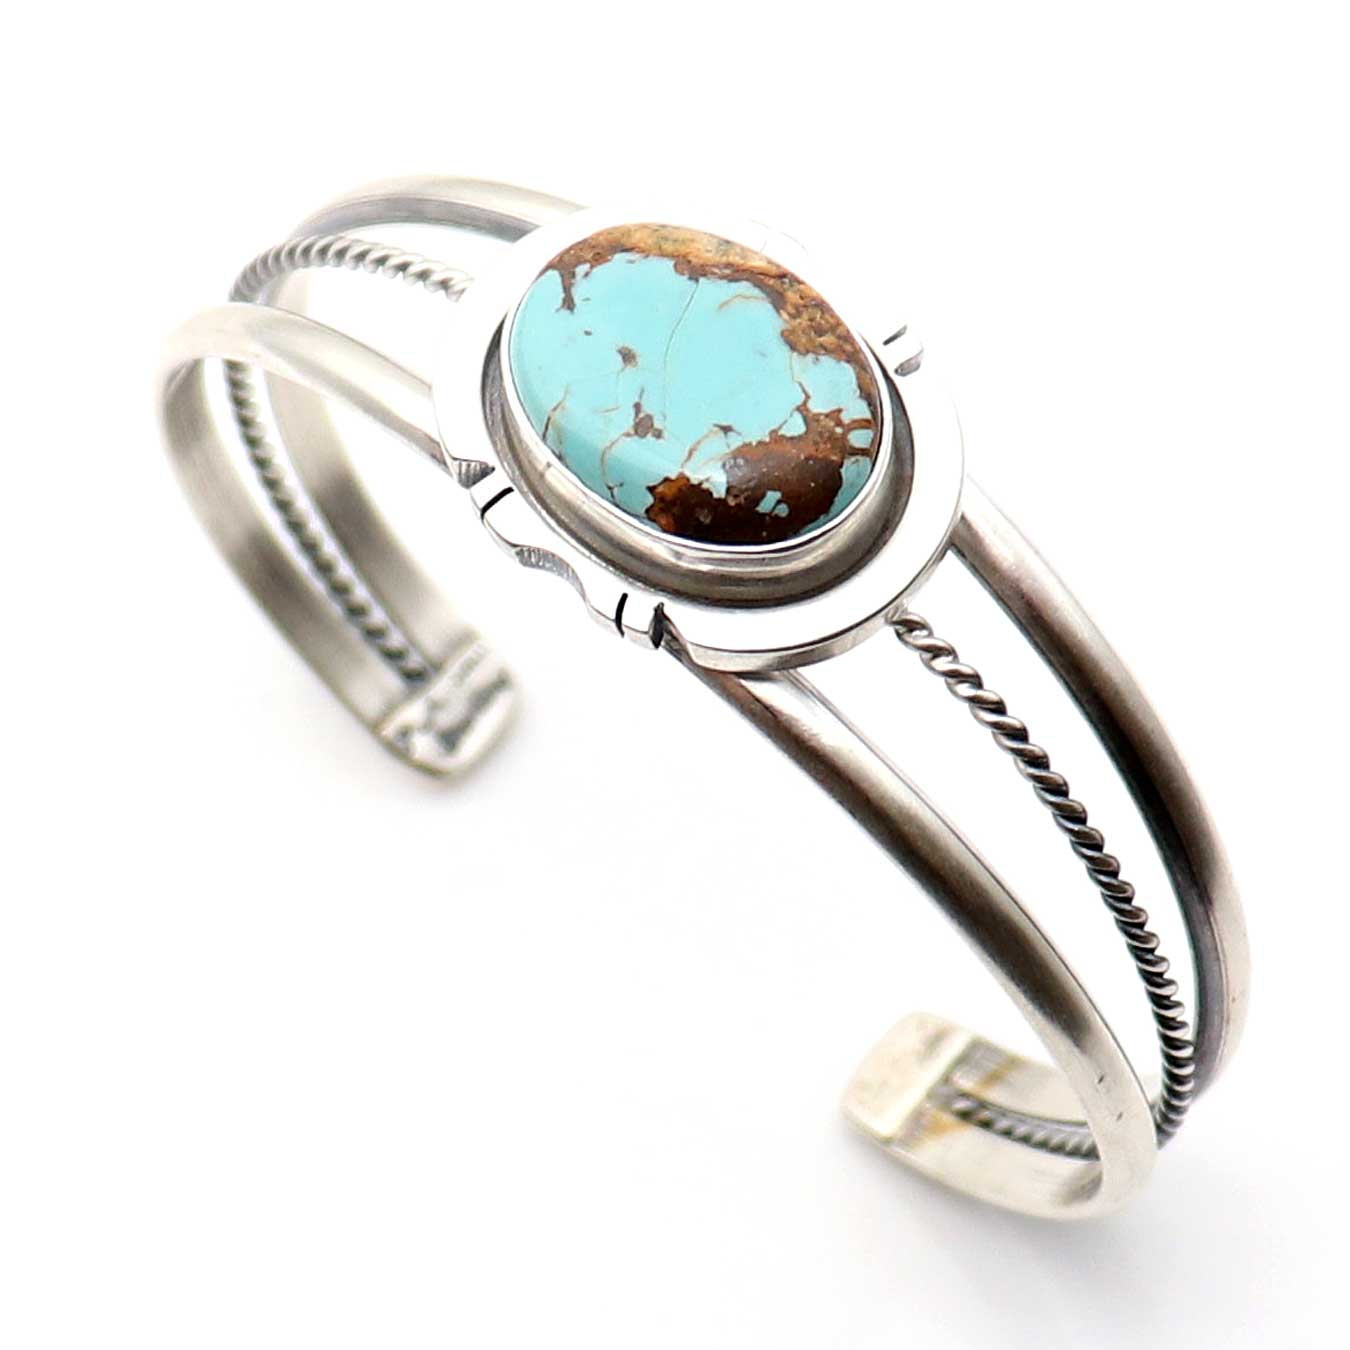 Load image into Gallery viewer, Single Stone Turquoise and Silver Bracelet
